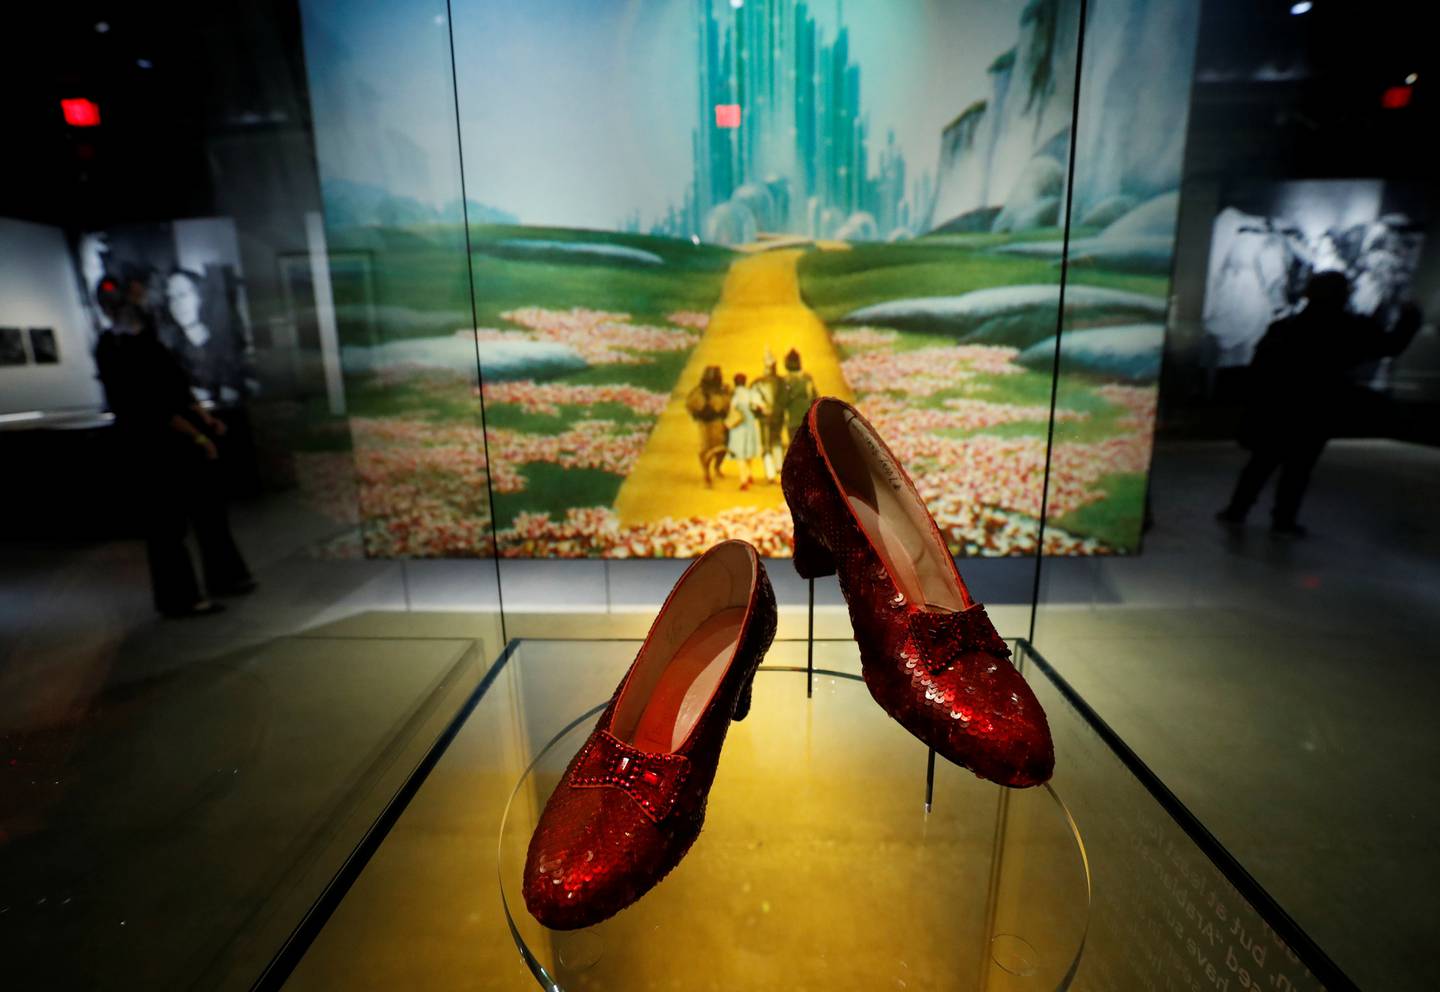 A pair of Dorothy's ruby slippers from 'The Wizard of Oz' are on display at the Academy Museum of Motion Pictures in Los Angeles. Reuters 